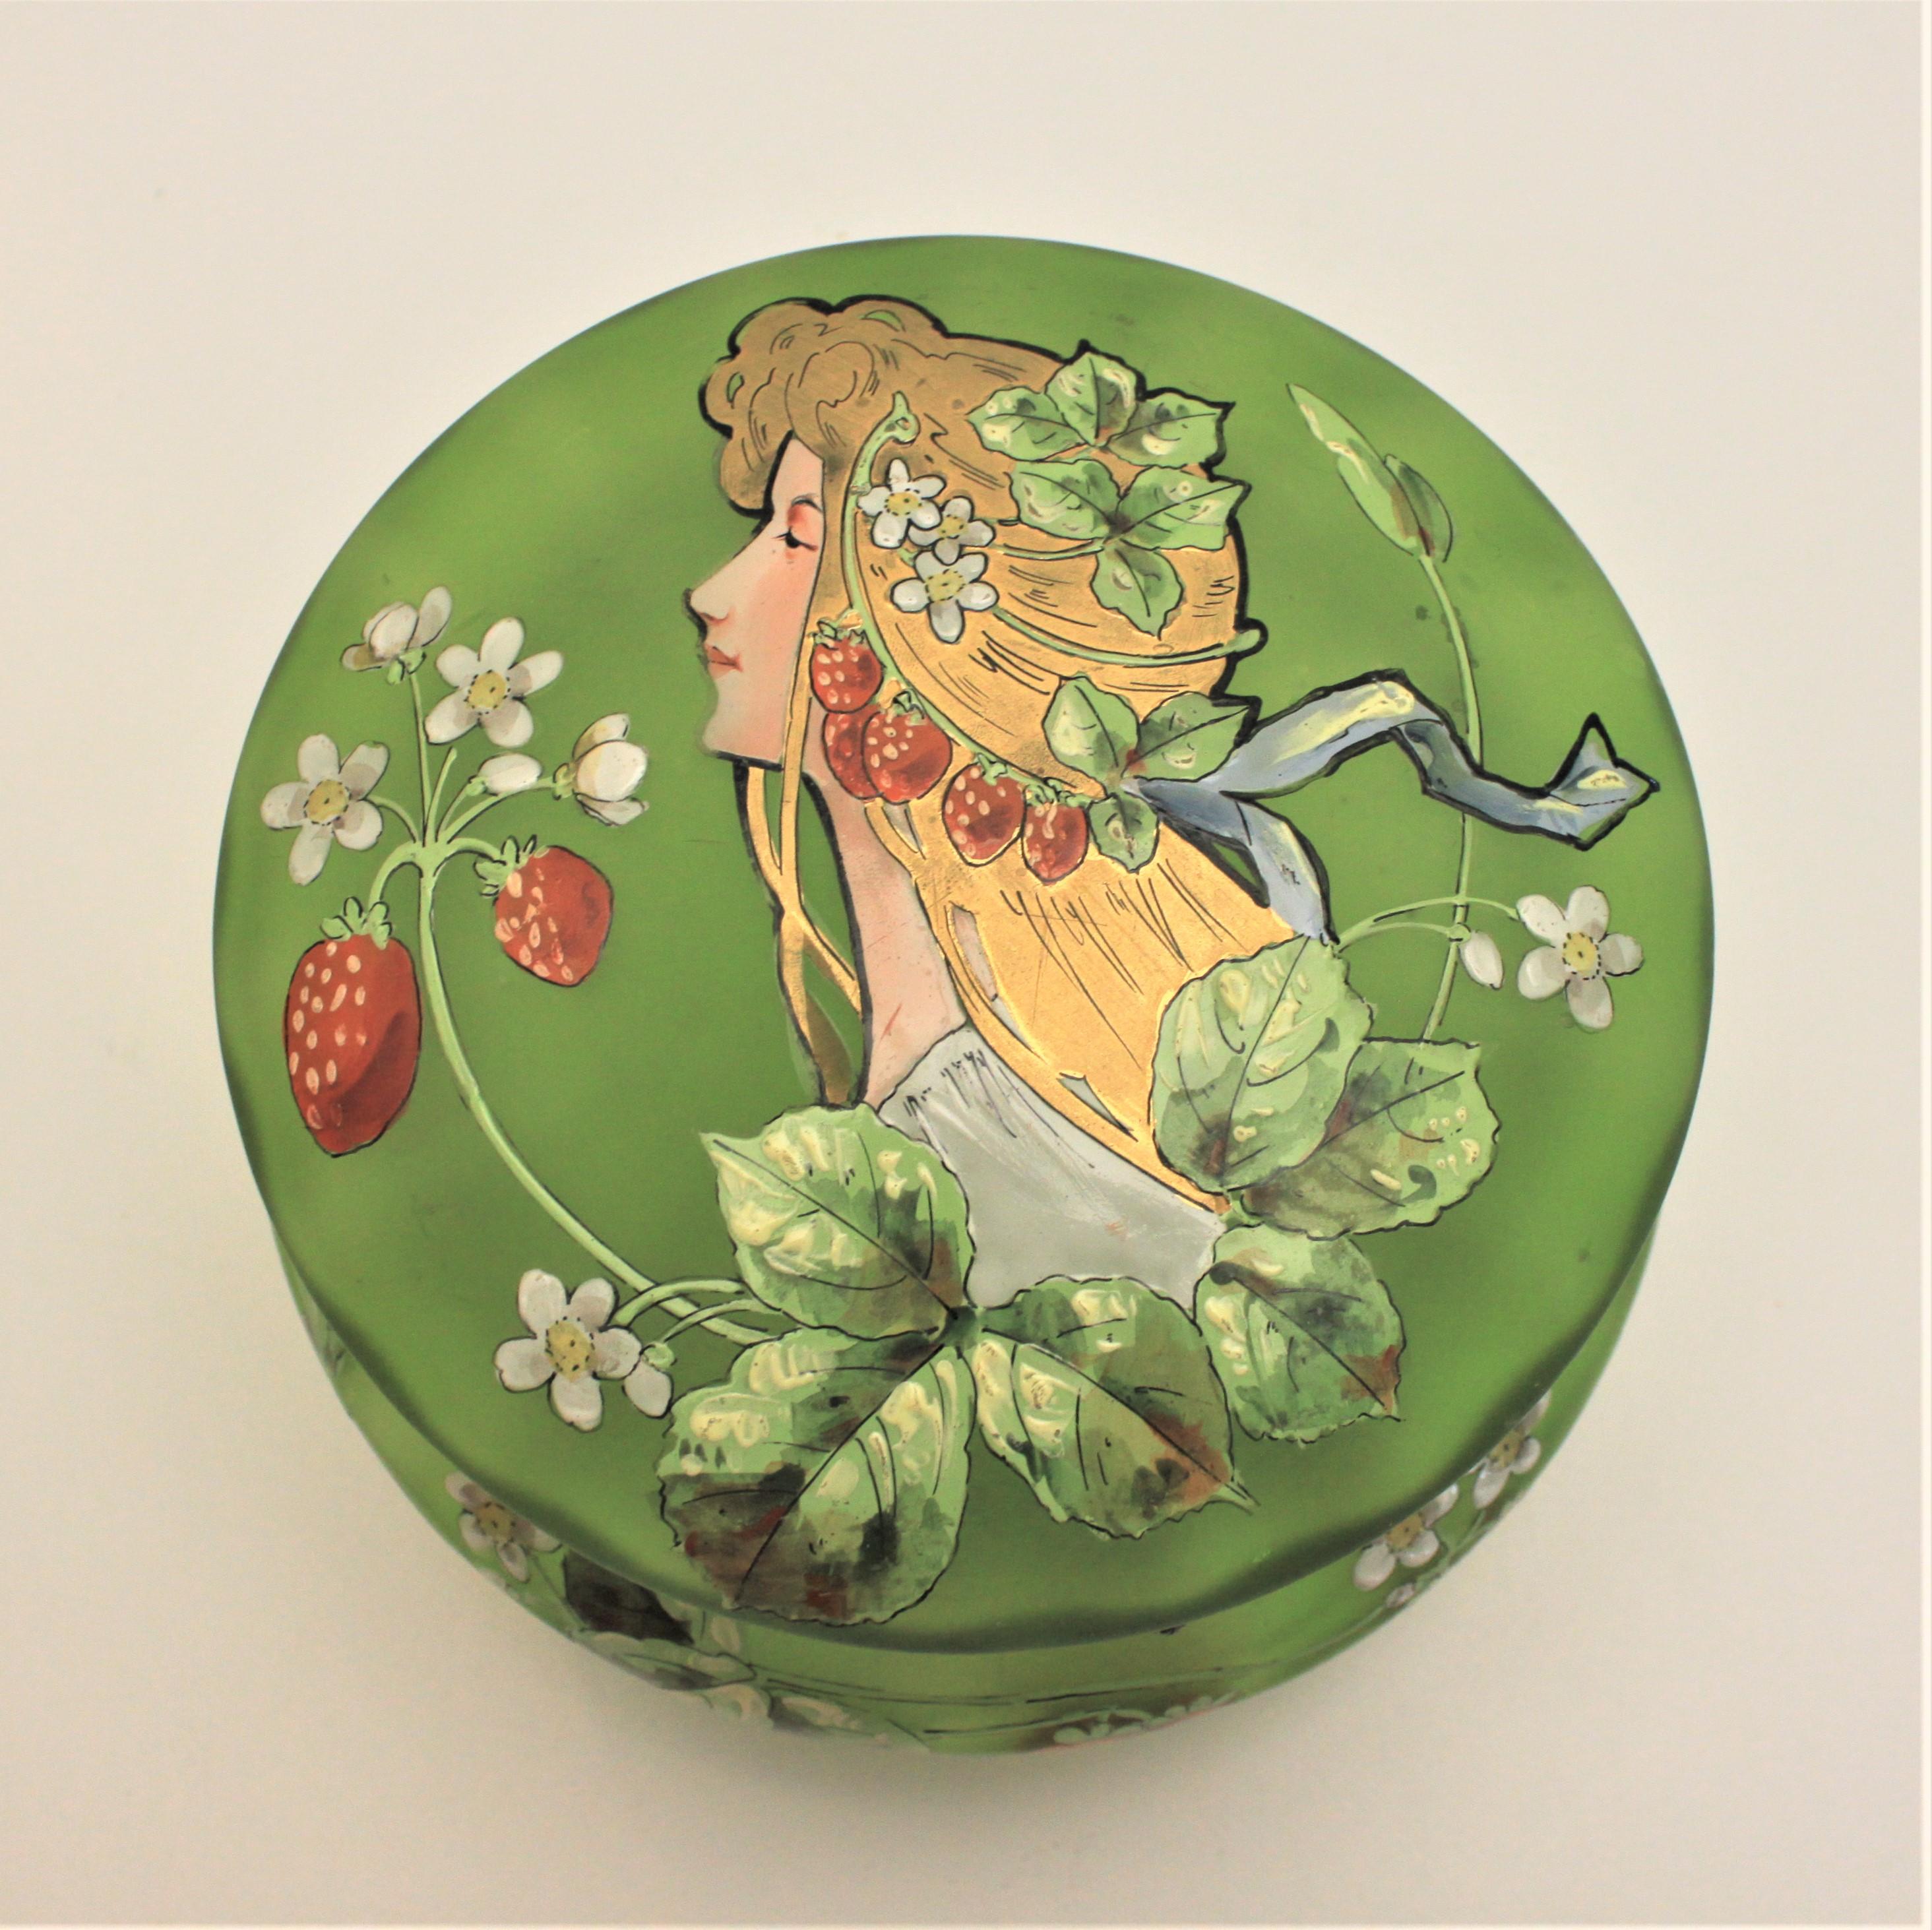 This Art Nouveau enameled green satin glass dresser jar most likely originates from England, but is unsigned. The green satin glass top shows an intricately hand painted portrait of a woman in the Art Nouveau style with strawberries on a flowering